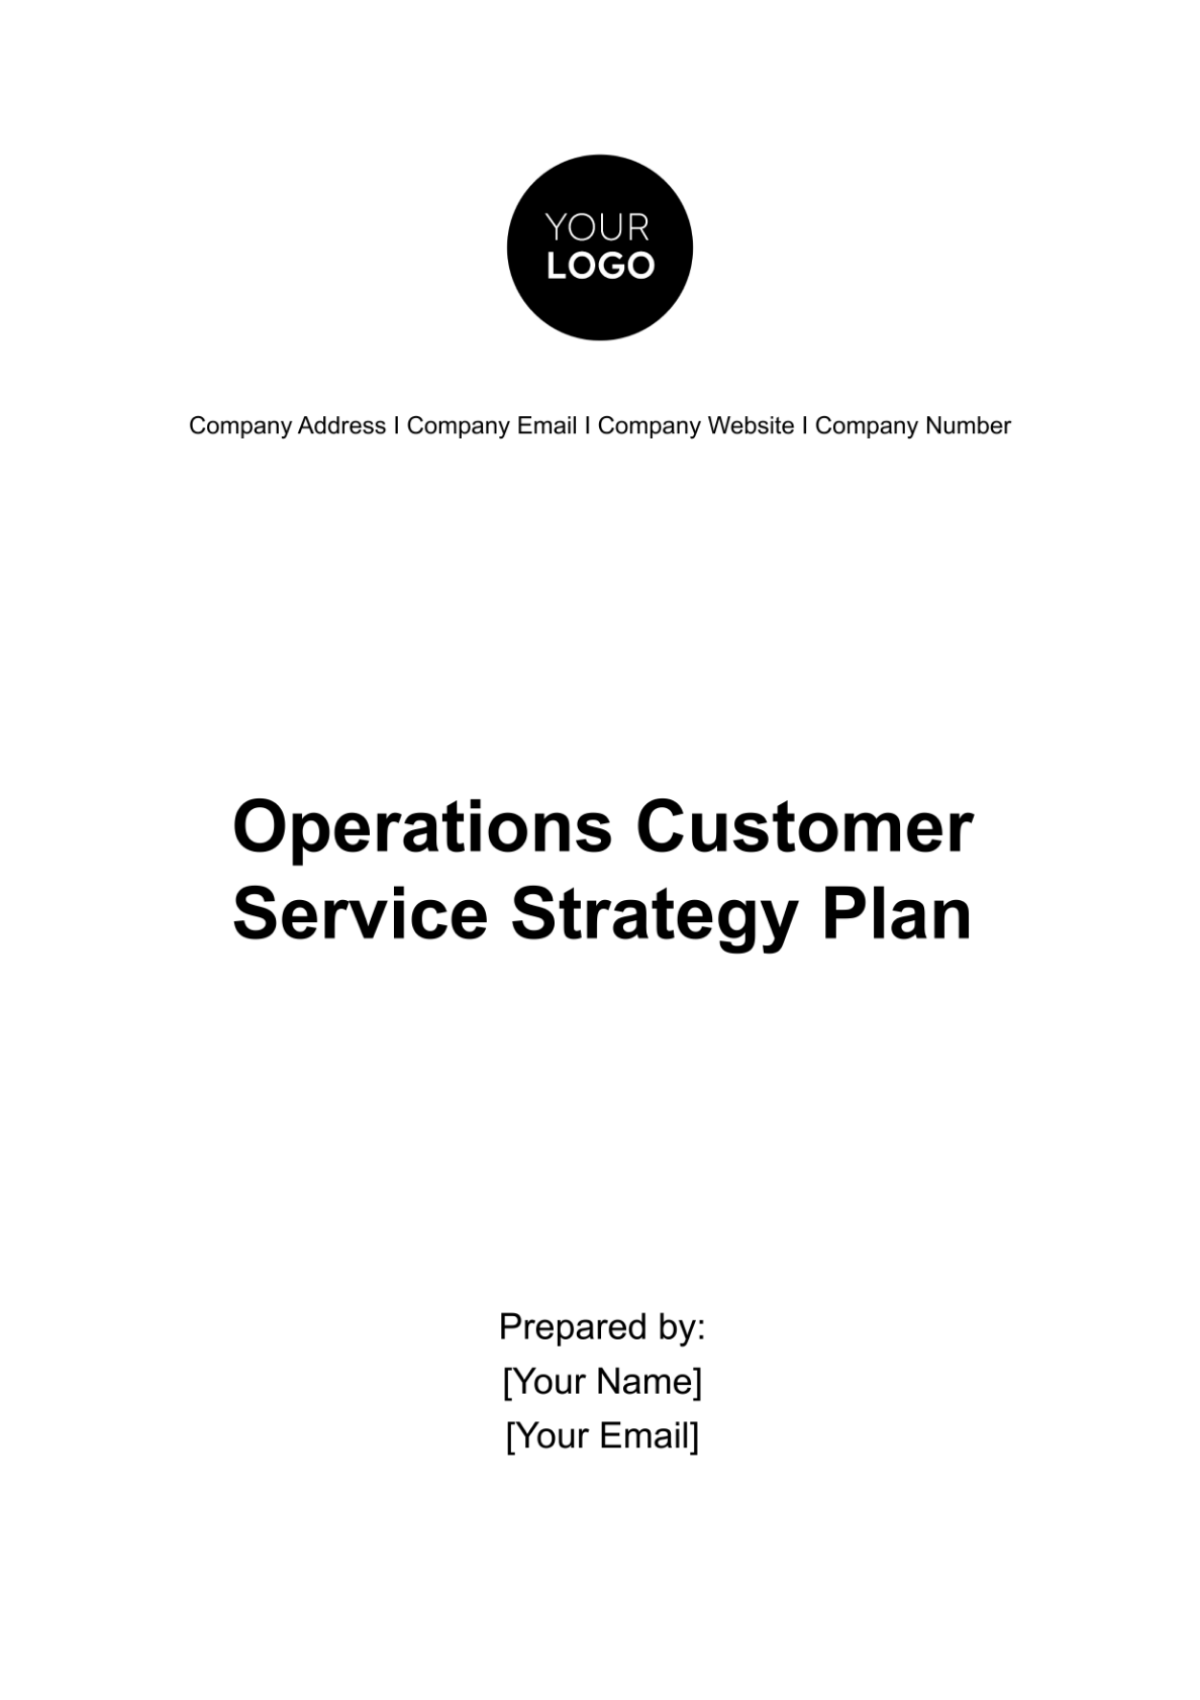 Operations Customer Service Strategy Plan Template